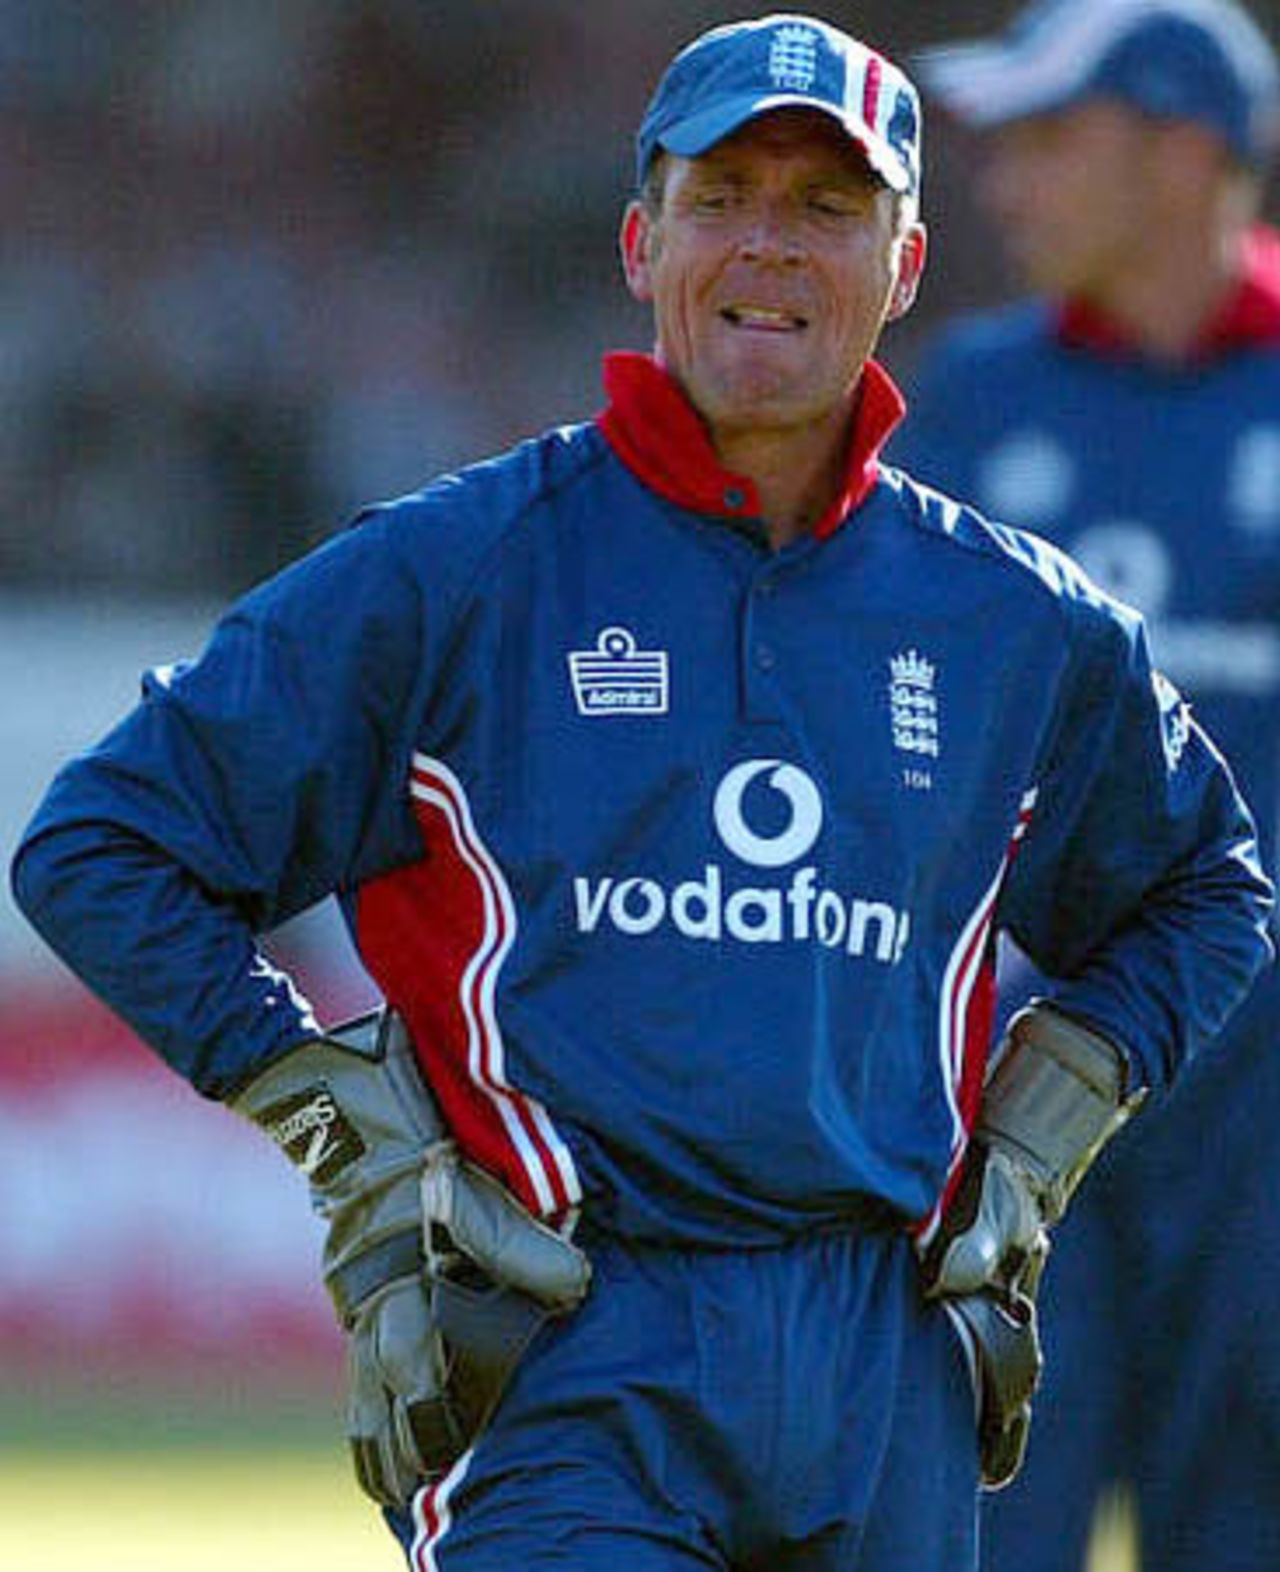 Alec Stewart can't believe it. England score 325 and end up losing